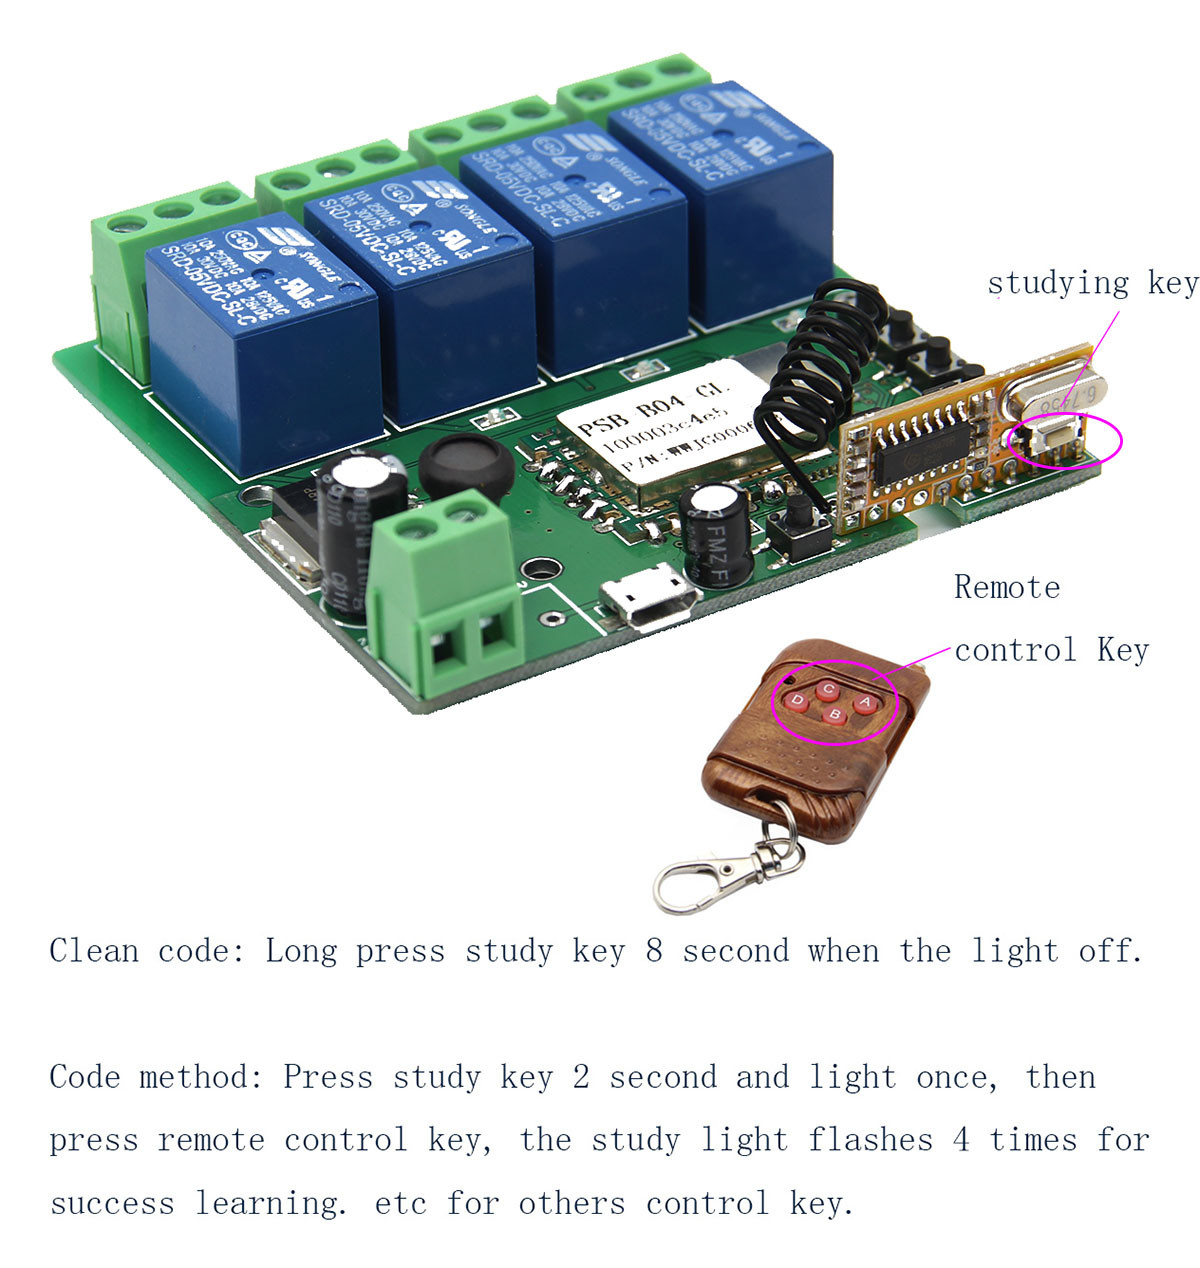 Geekcreitreg-DIY-32V-4-Channel-JogInching-And-Self-locking--433MHz-Receiver-Module--APP-Remote-Contr-1114926